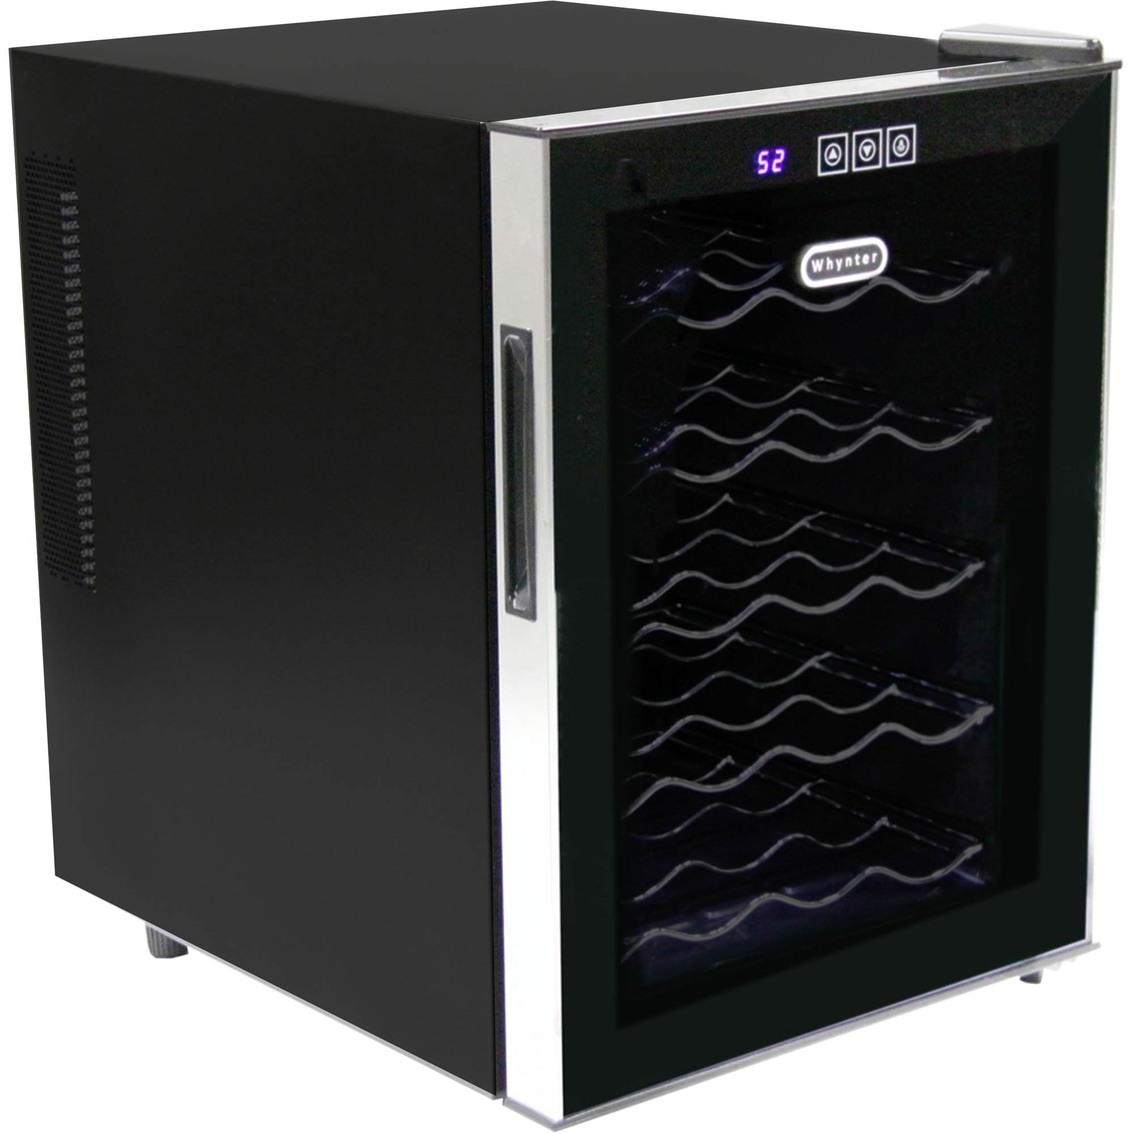 Whynter 20 Bottle Dual Zone Thermoelectric Wine Cooler - Image 2 of 4